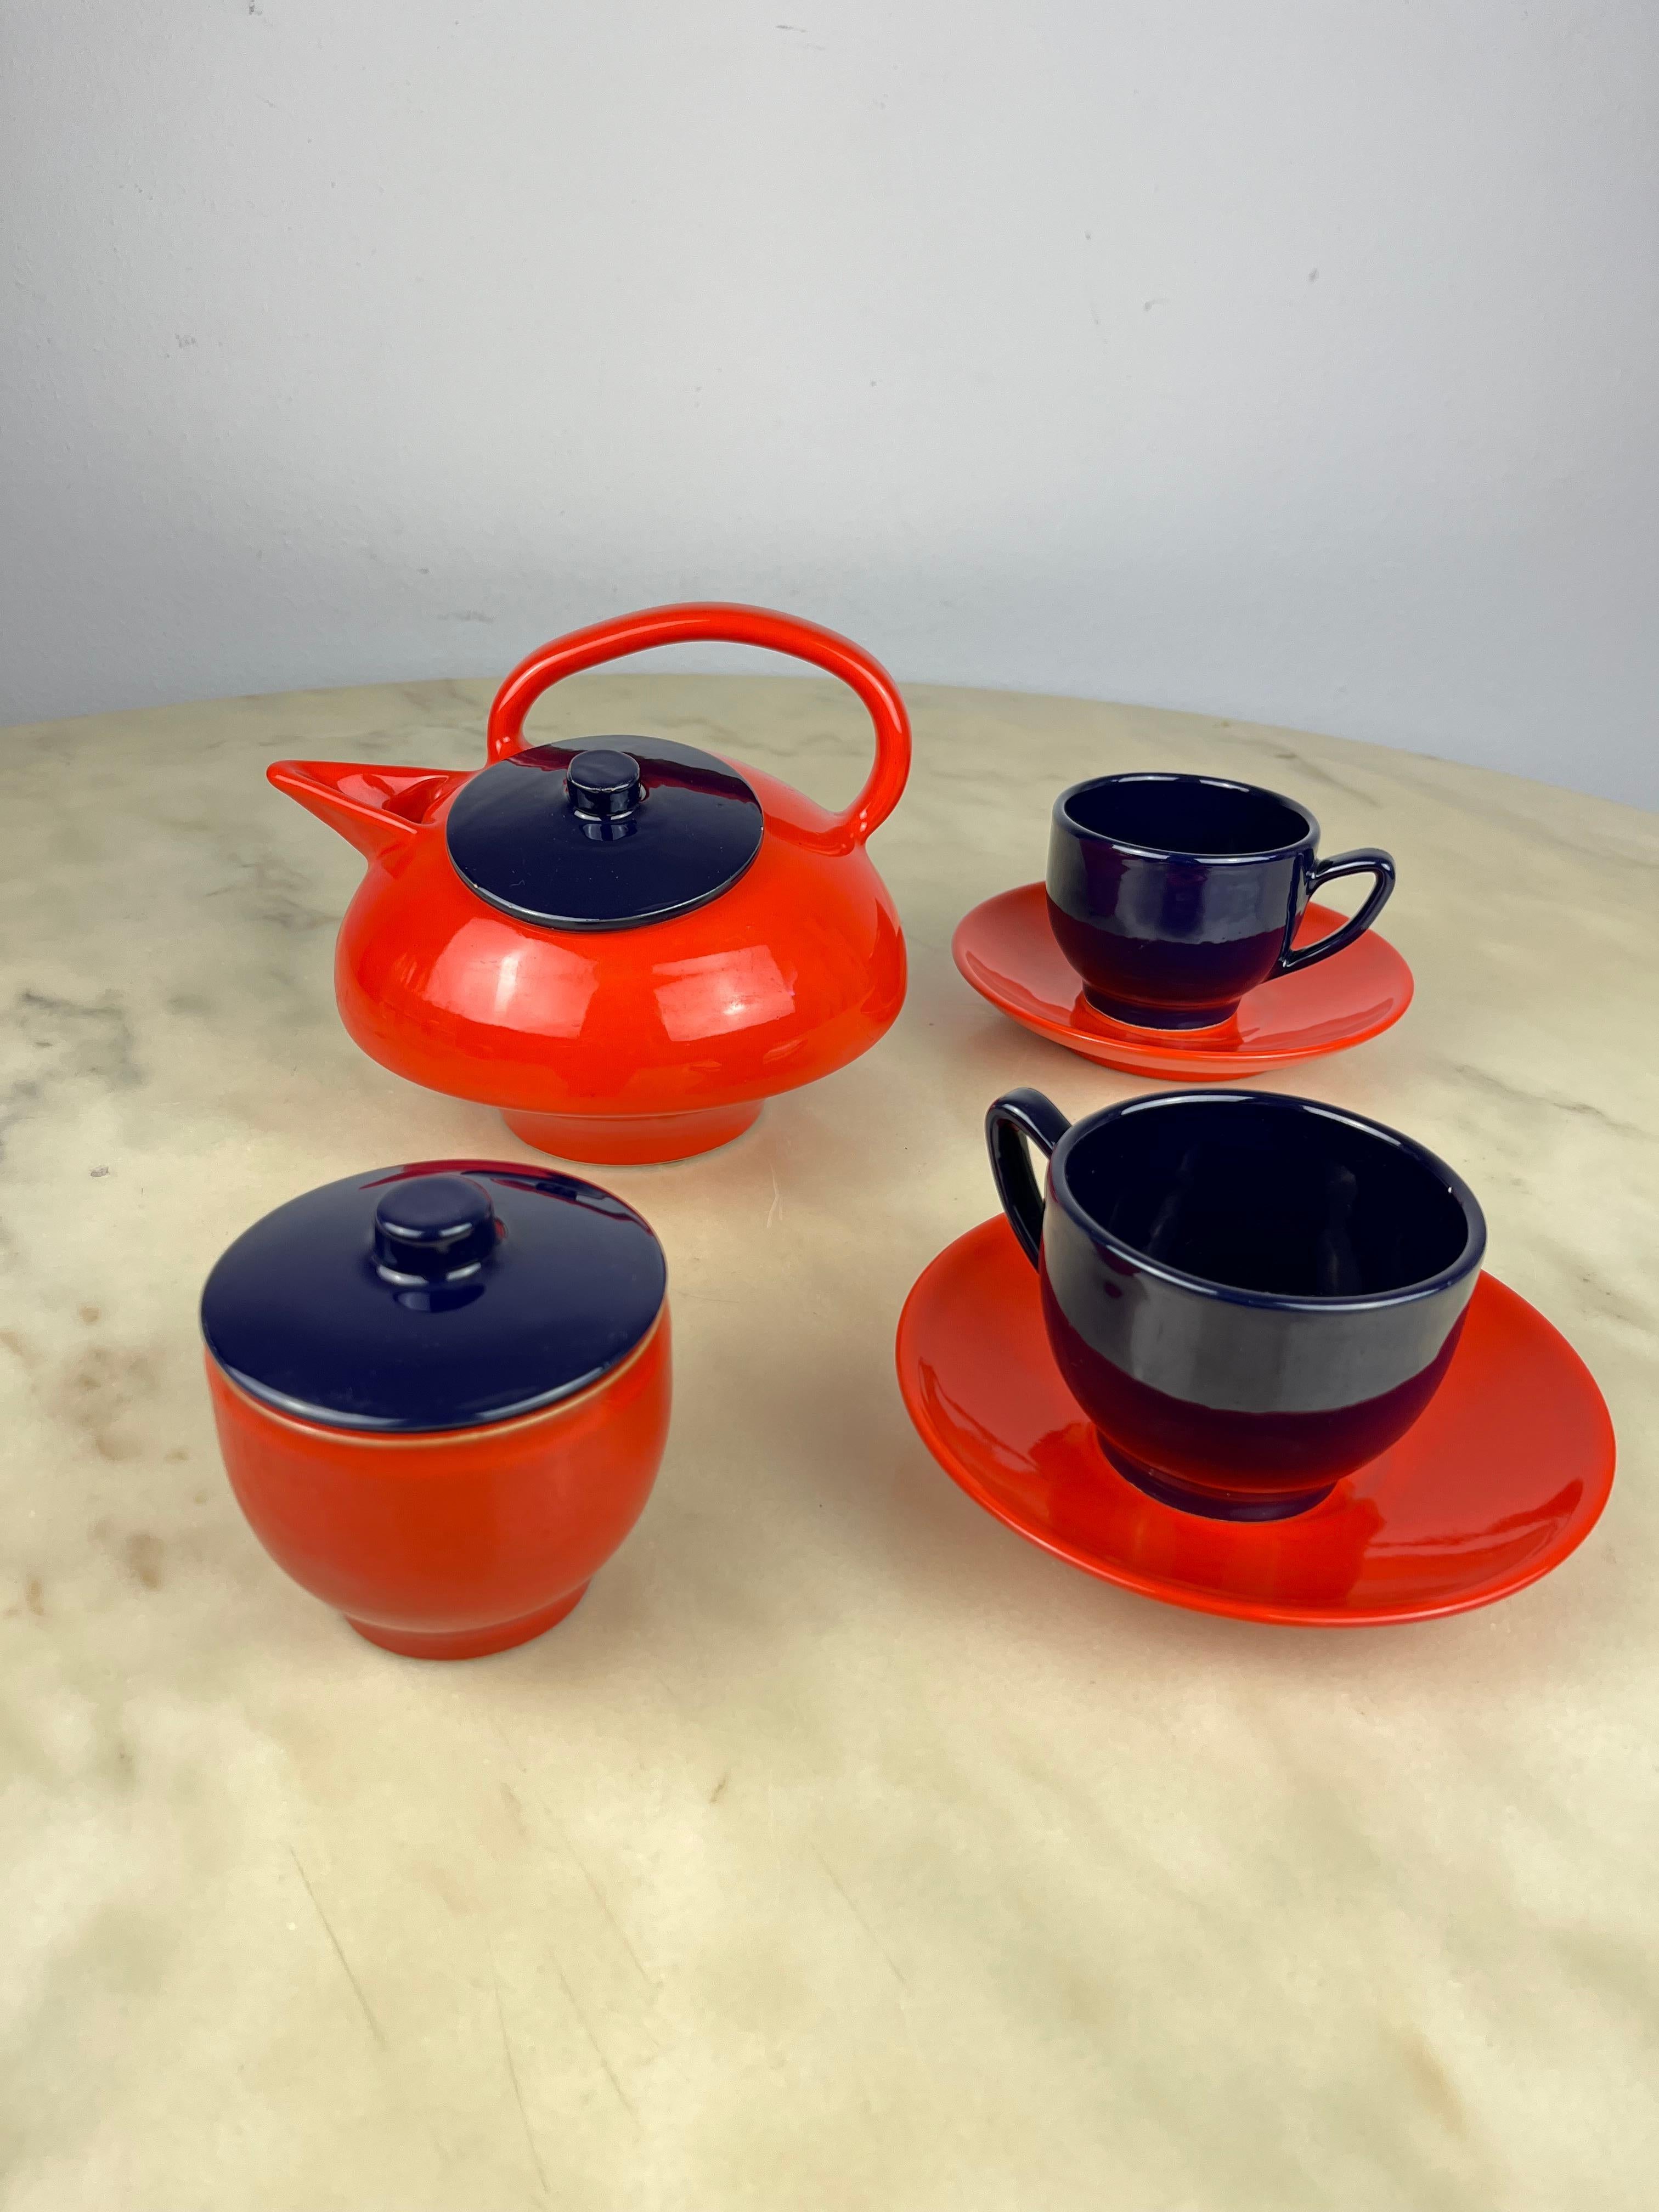  Vintage Ceramic Tea Set, Italy, 1970s In Excellent Condition For Sale In Palermo, IT